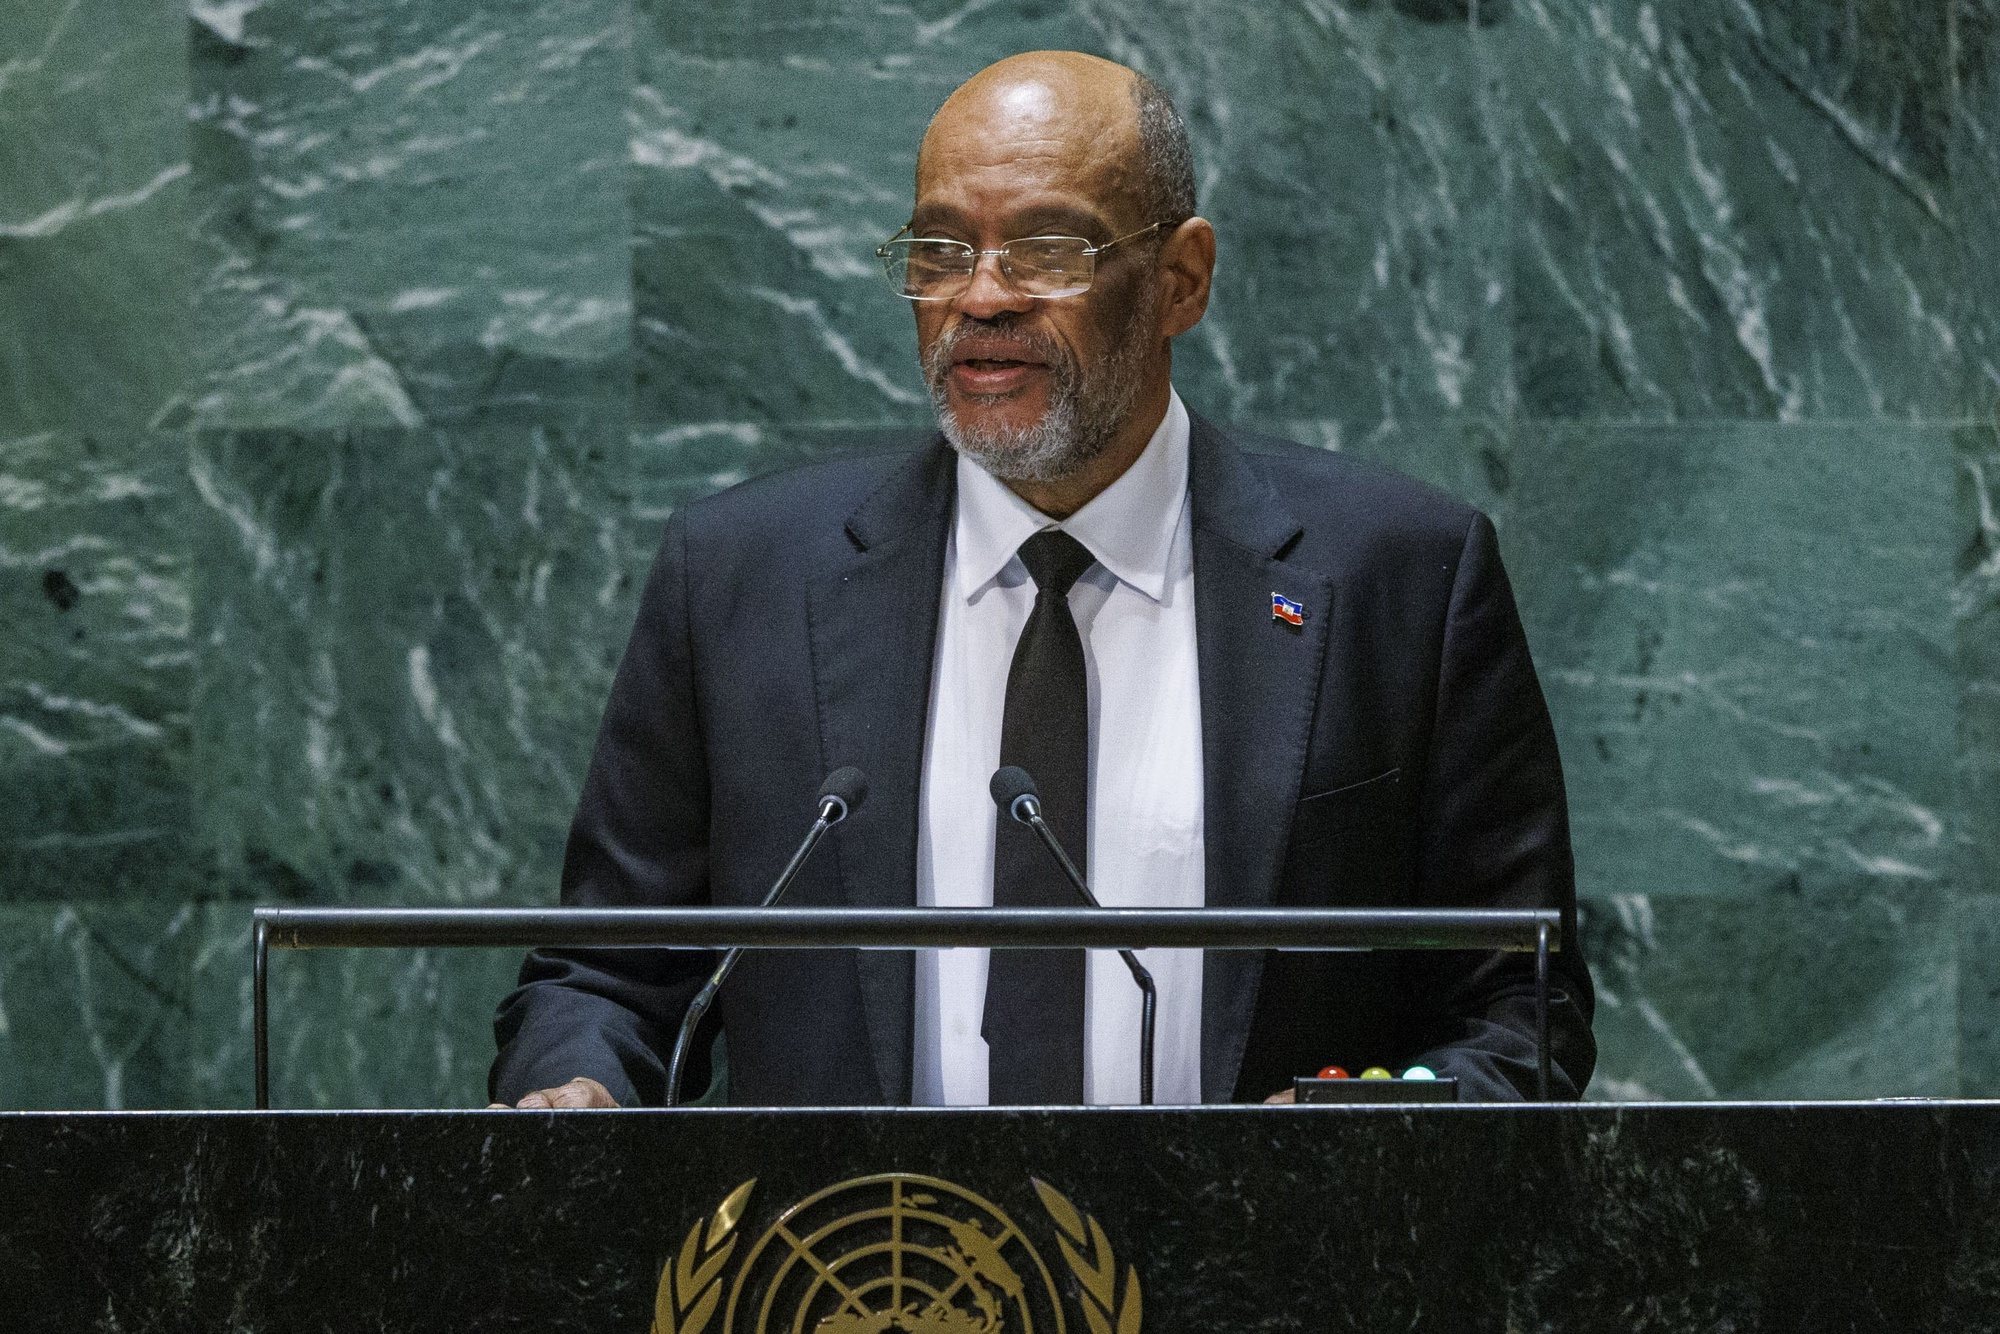 epa11215566 (FILE) - Haiti&#039;s Prime Minister Ariel Henry speaks during the 78th session of the United Nations General Assembly at United Nations Headquarters in New York, New York, USA, 22 September 2023 (reissued 12 March 2024). According to a statement from the Caribbean Community and Common Market (CARICOM) regional bloc, Prime Minister of Haiti Ariel Henry resigned.  EPA/SARAH YENESEL